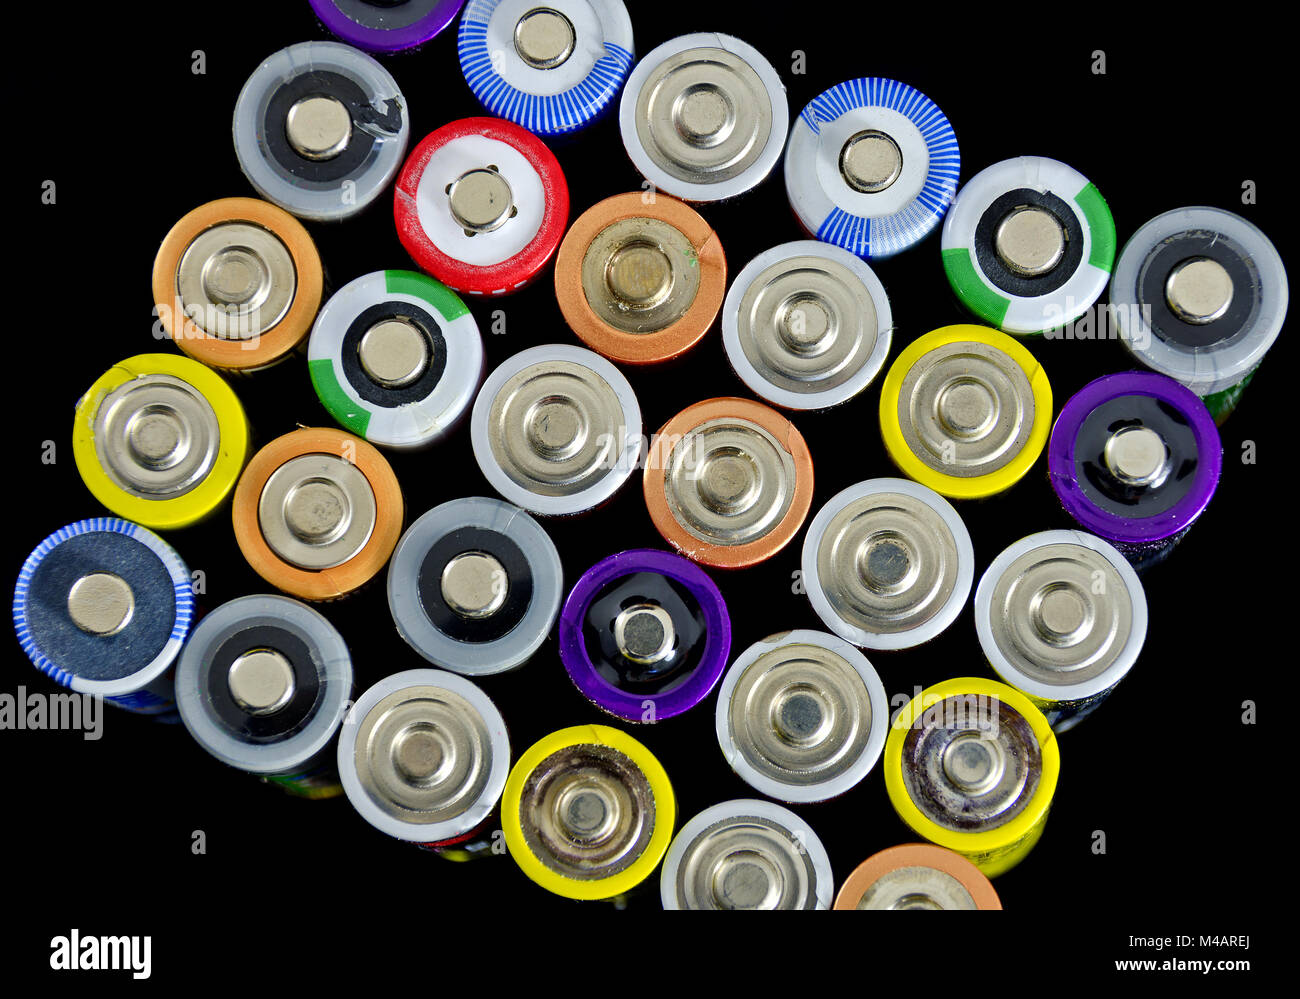 positive poles of used batteries and rechargeable cells Stock Photo